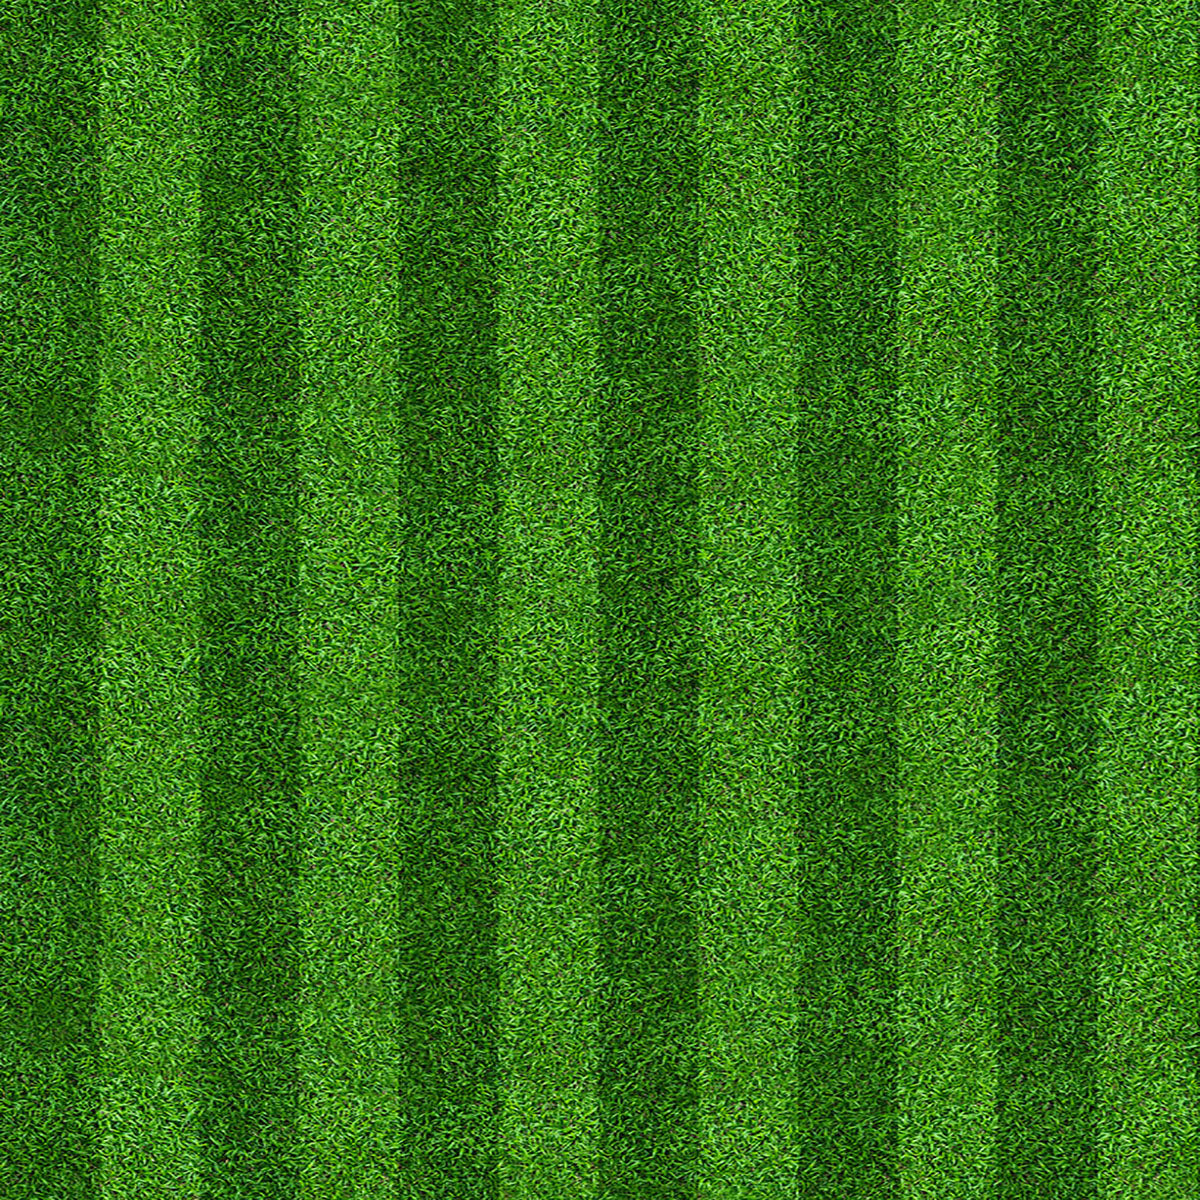 Green Grass Floor Football Field Photography Backdrops Fabric Background